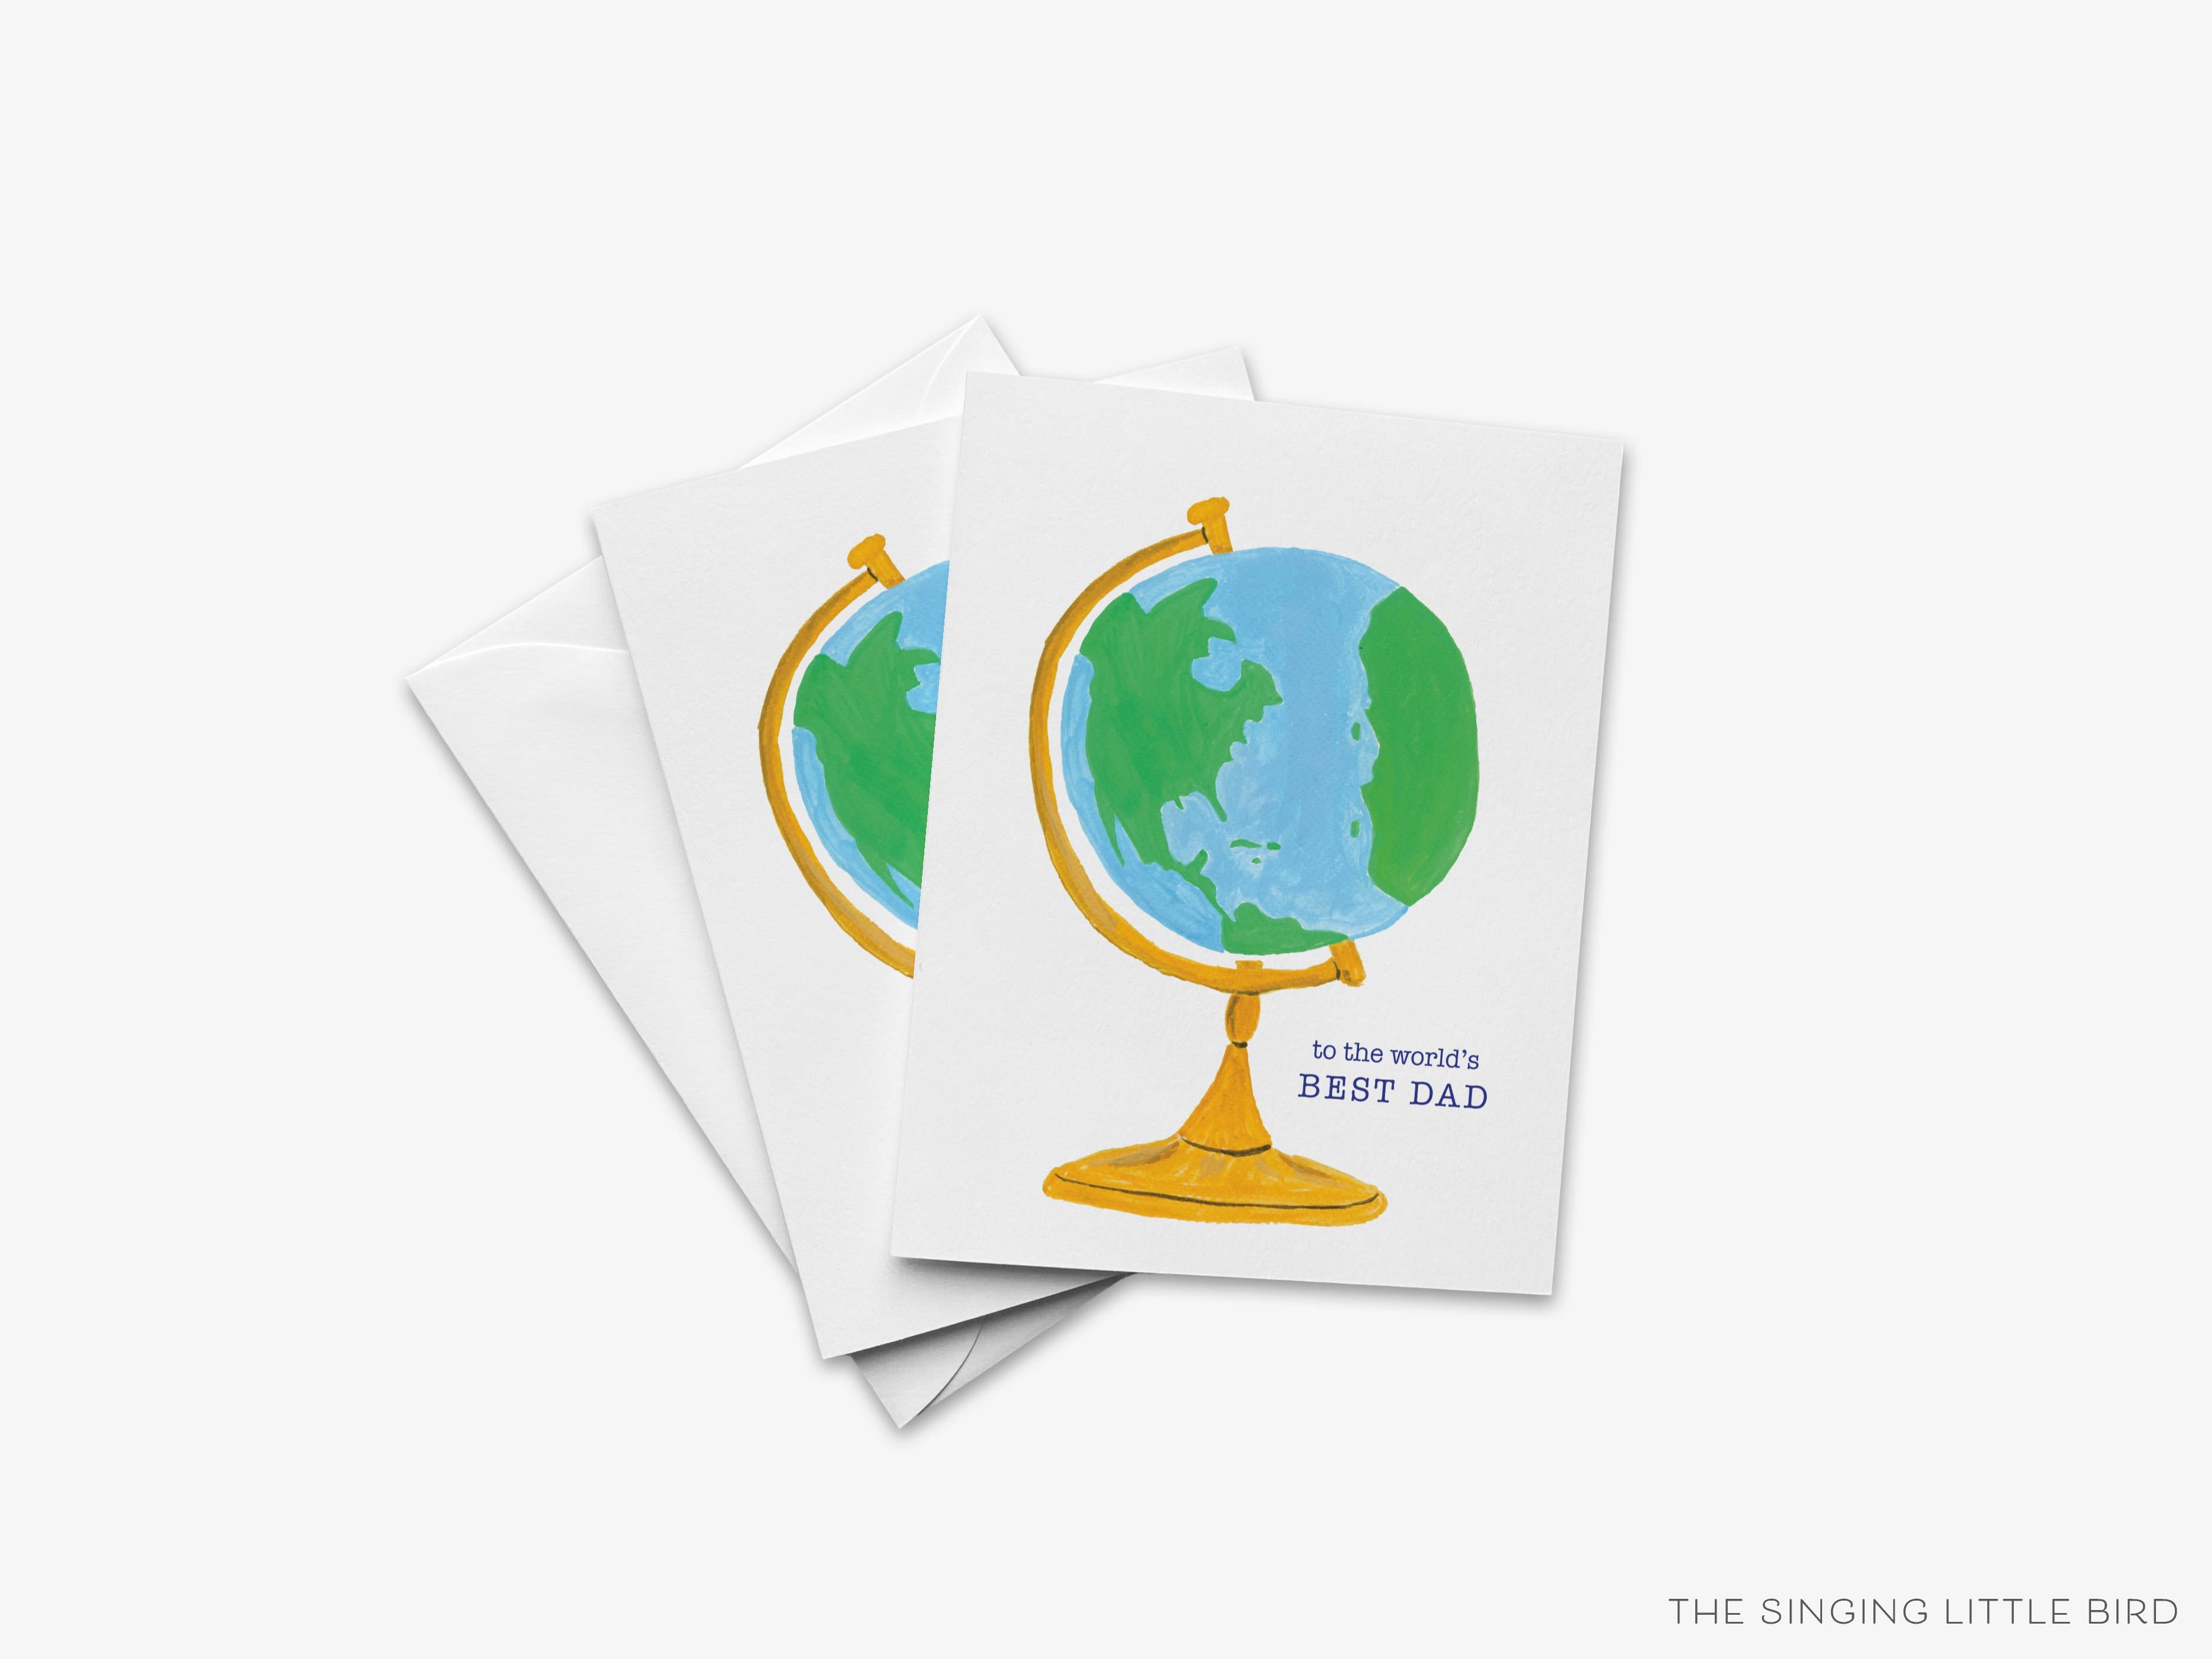 To The World's Best Dad Card-These folded greeting cards are 4.25x5.5 and feature our hand-painted globe, printed in the USA on 100lb textured stock. They come with a White envelope and make a great Father's Day or birthday card for dad.-The Singing Little Bird